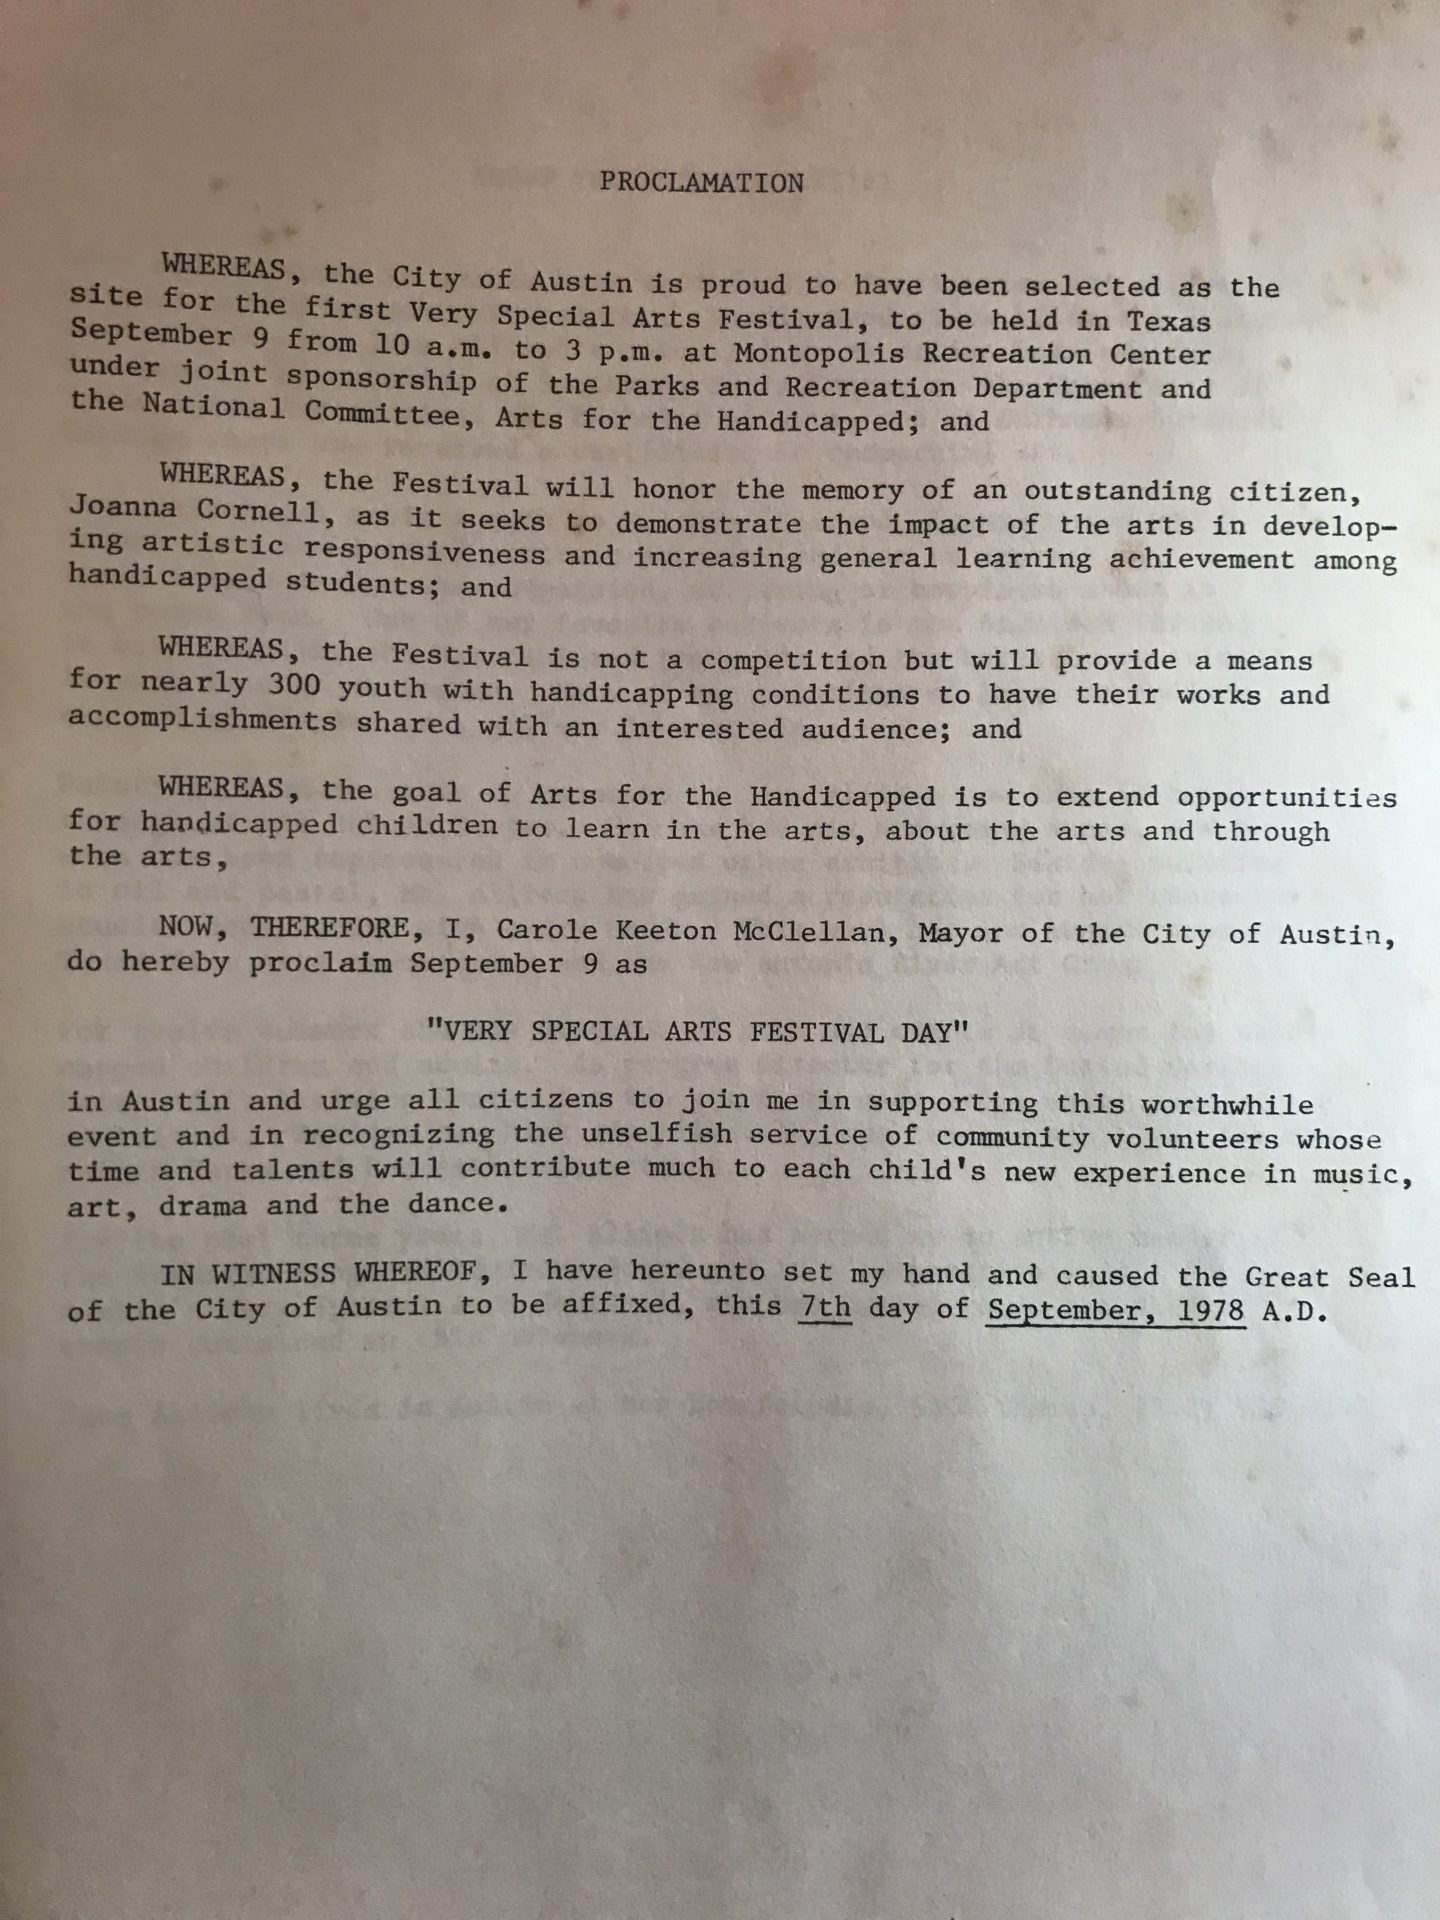 Photo of the 1978 proclamation